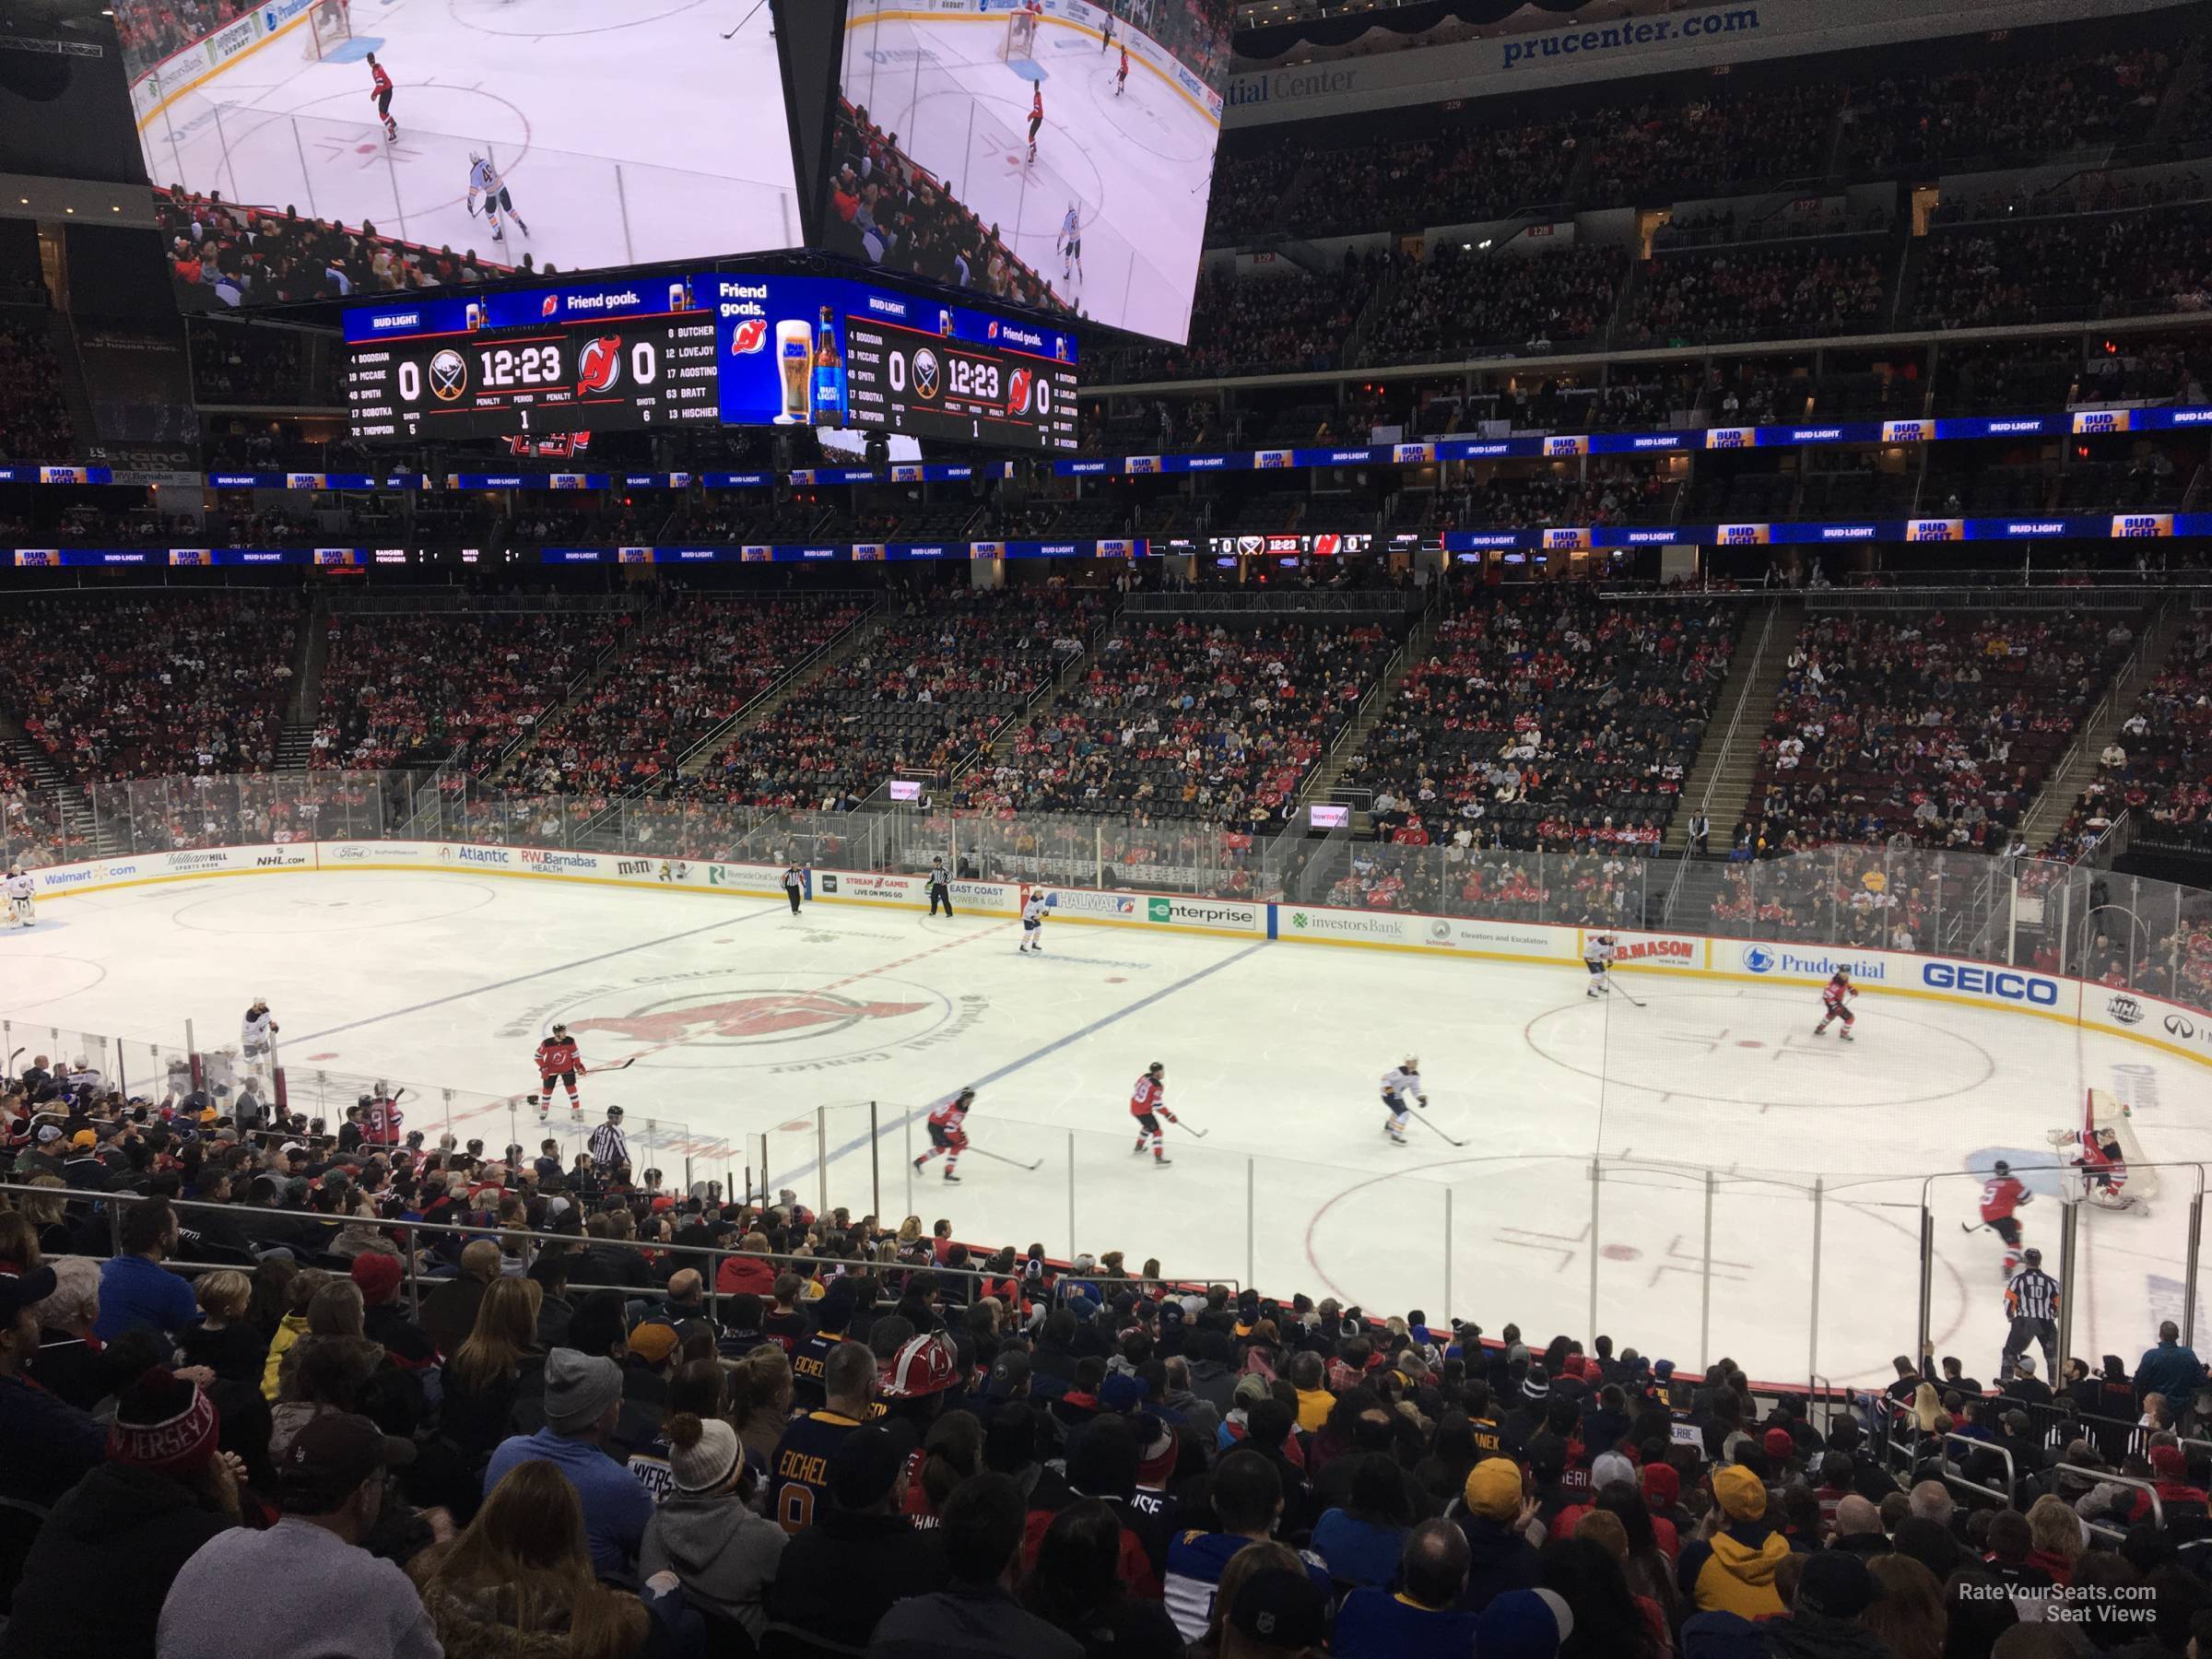 Prudential Center, section 4, home of New Jersey Devils, New